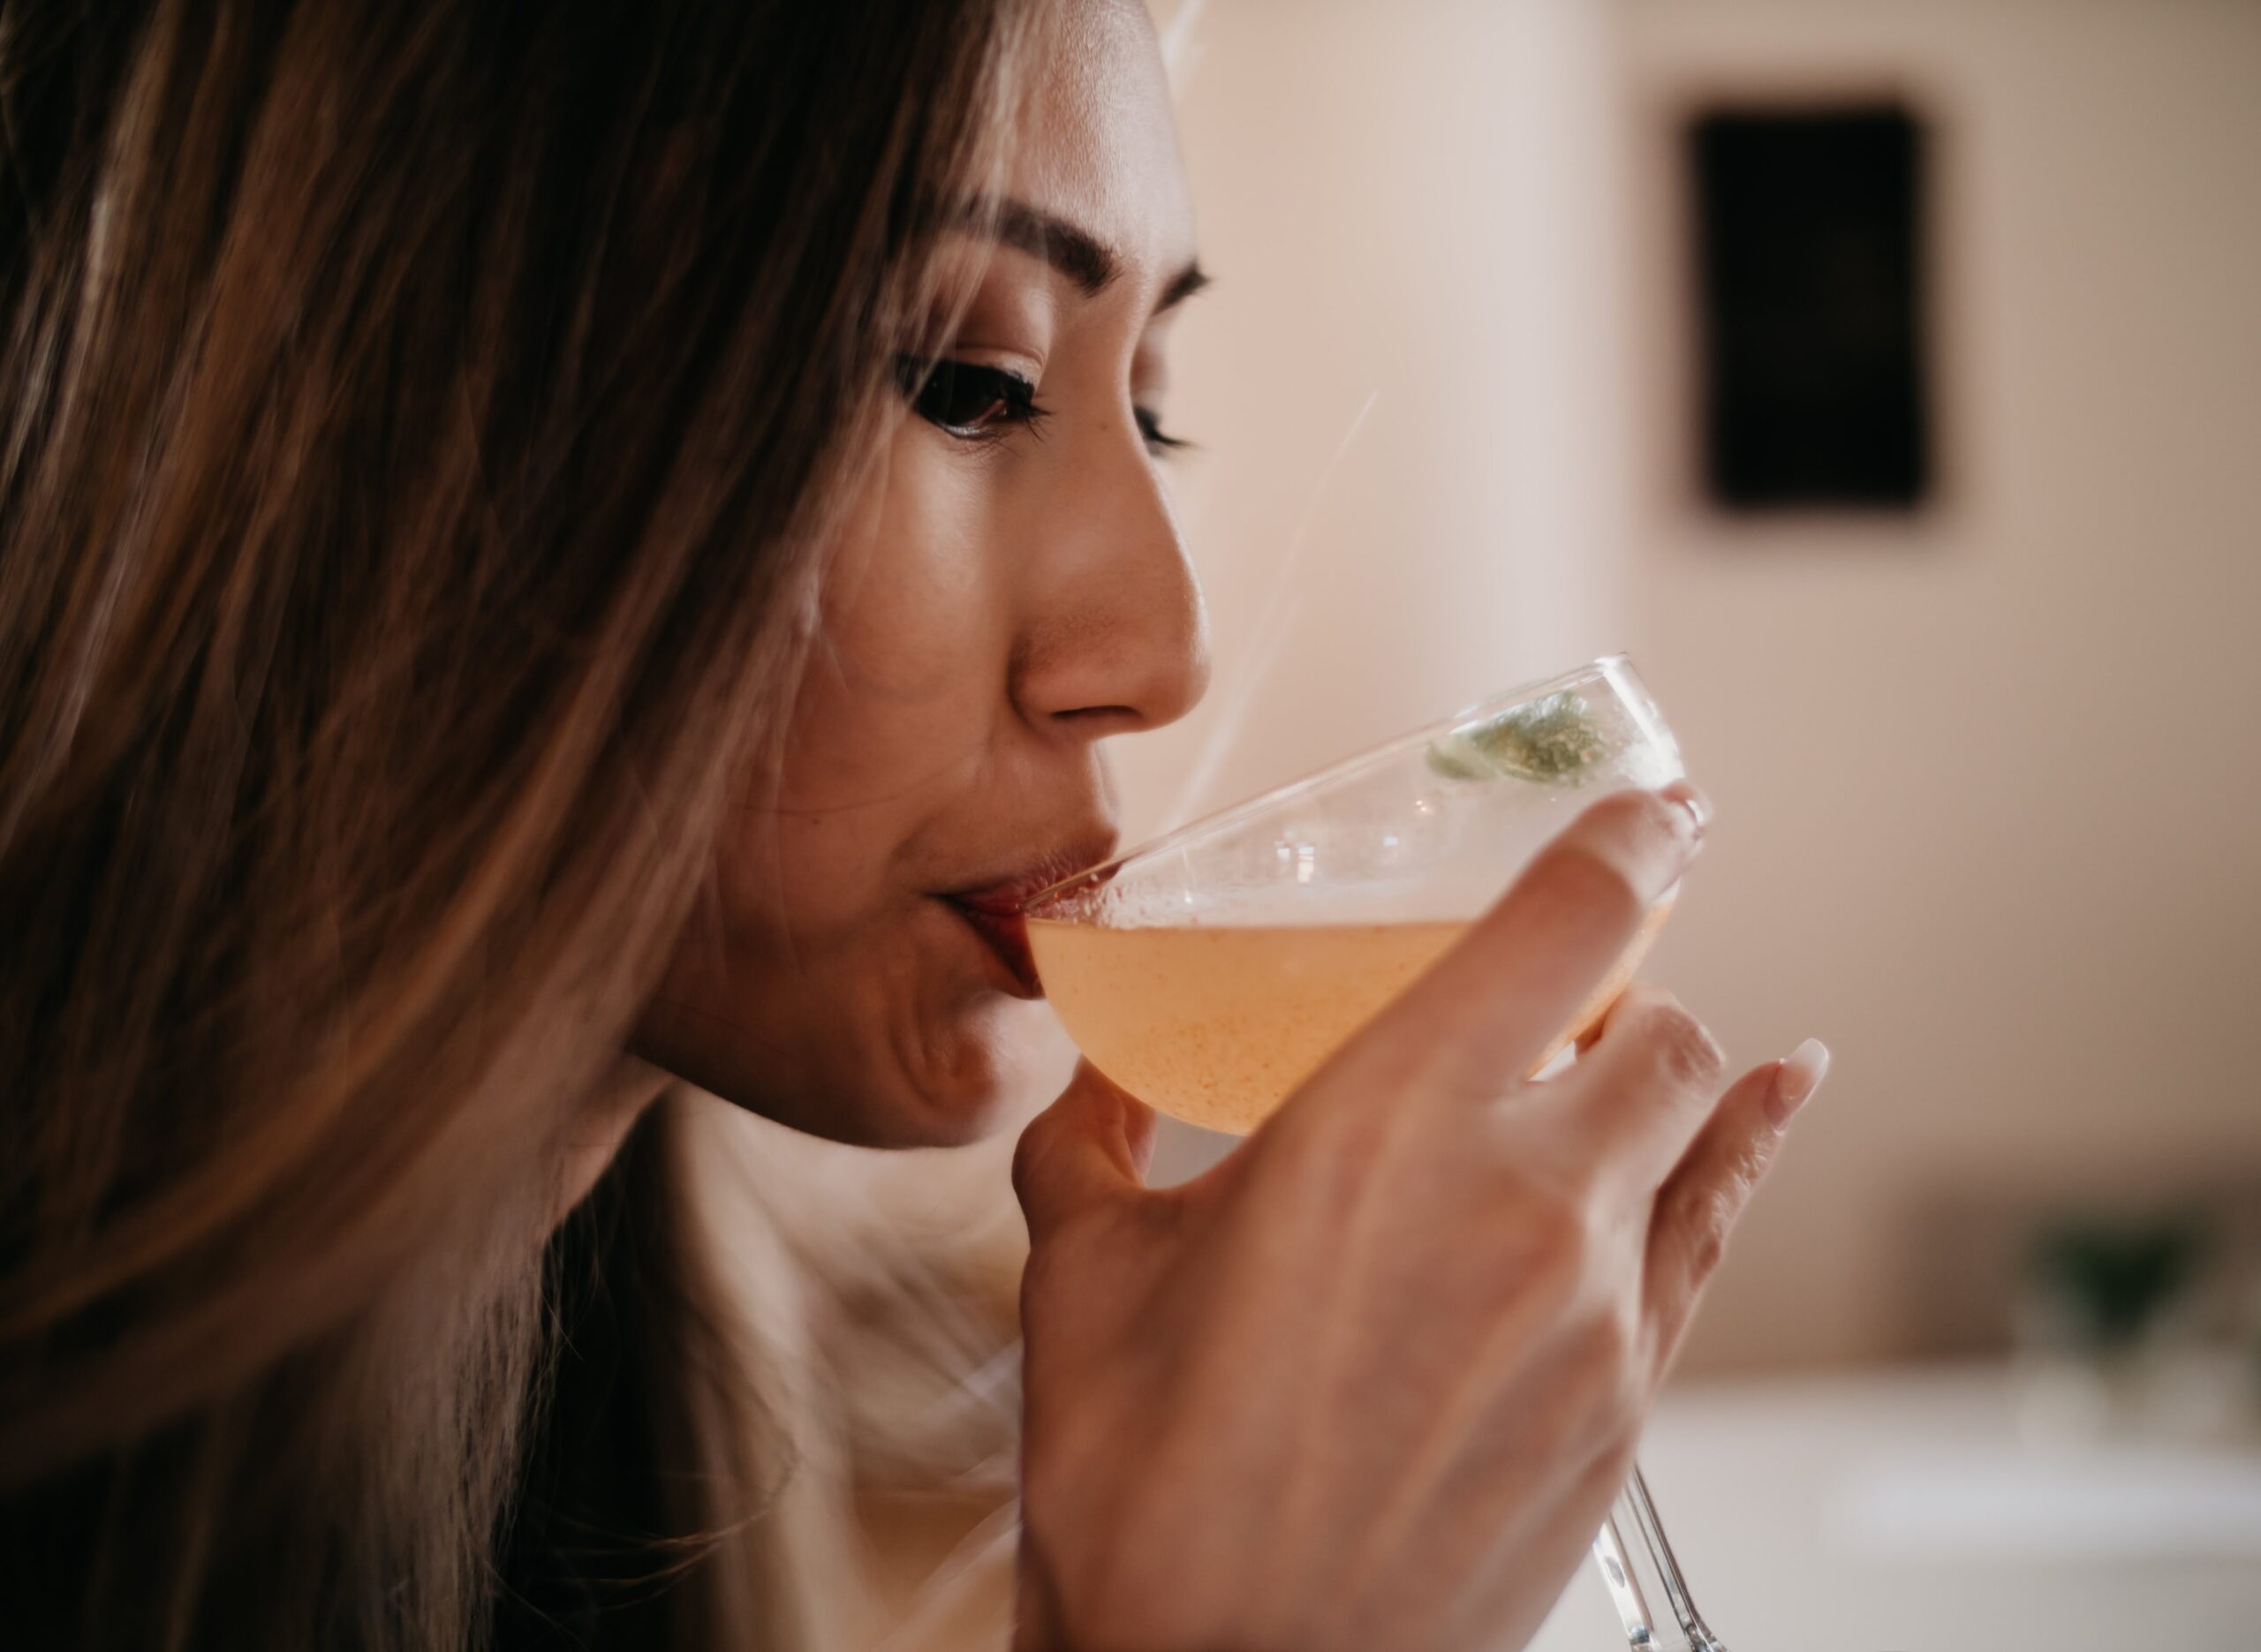 A woman sipping from a martini glass, reflecting contemplation and nuanced emotions, symbolizing the complexities of gray area drinking.